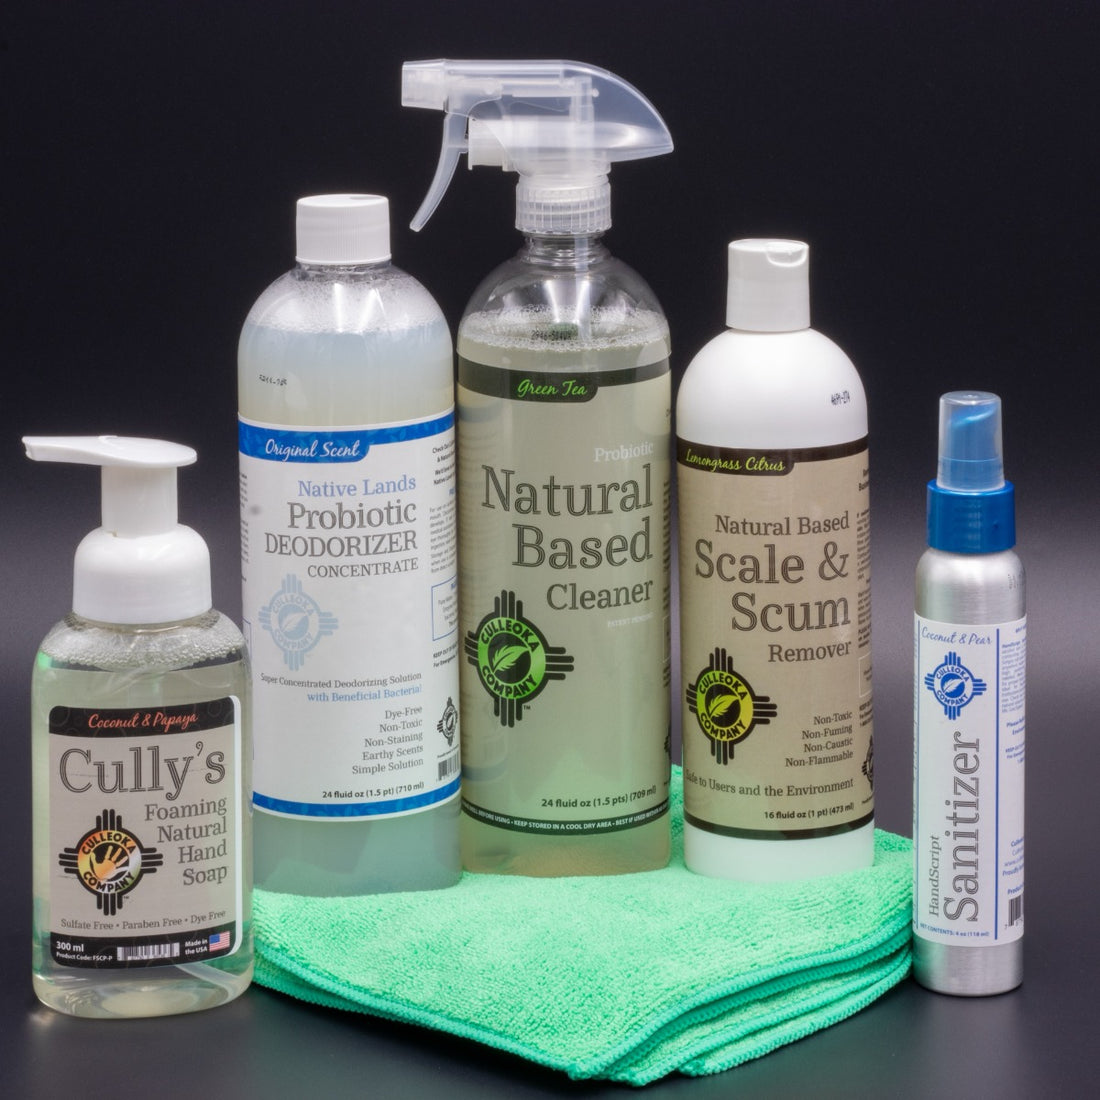 Culleoka Company's Natural Based Cleaning products